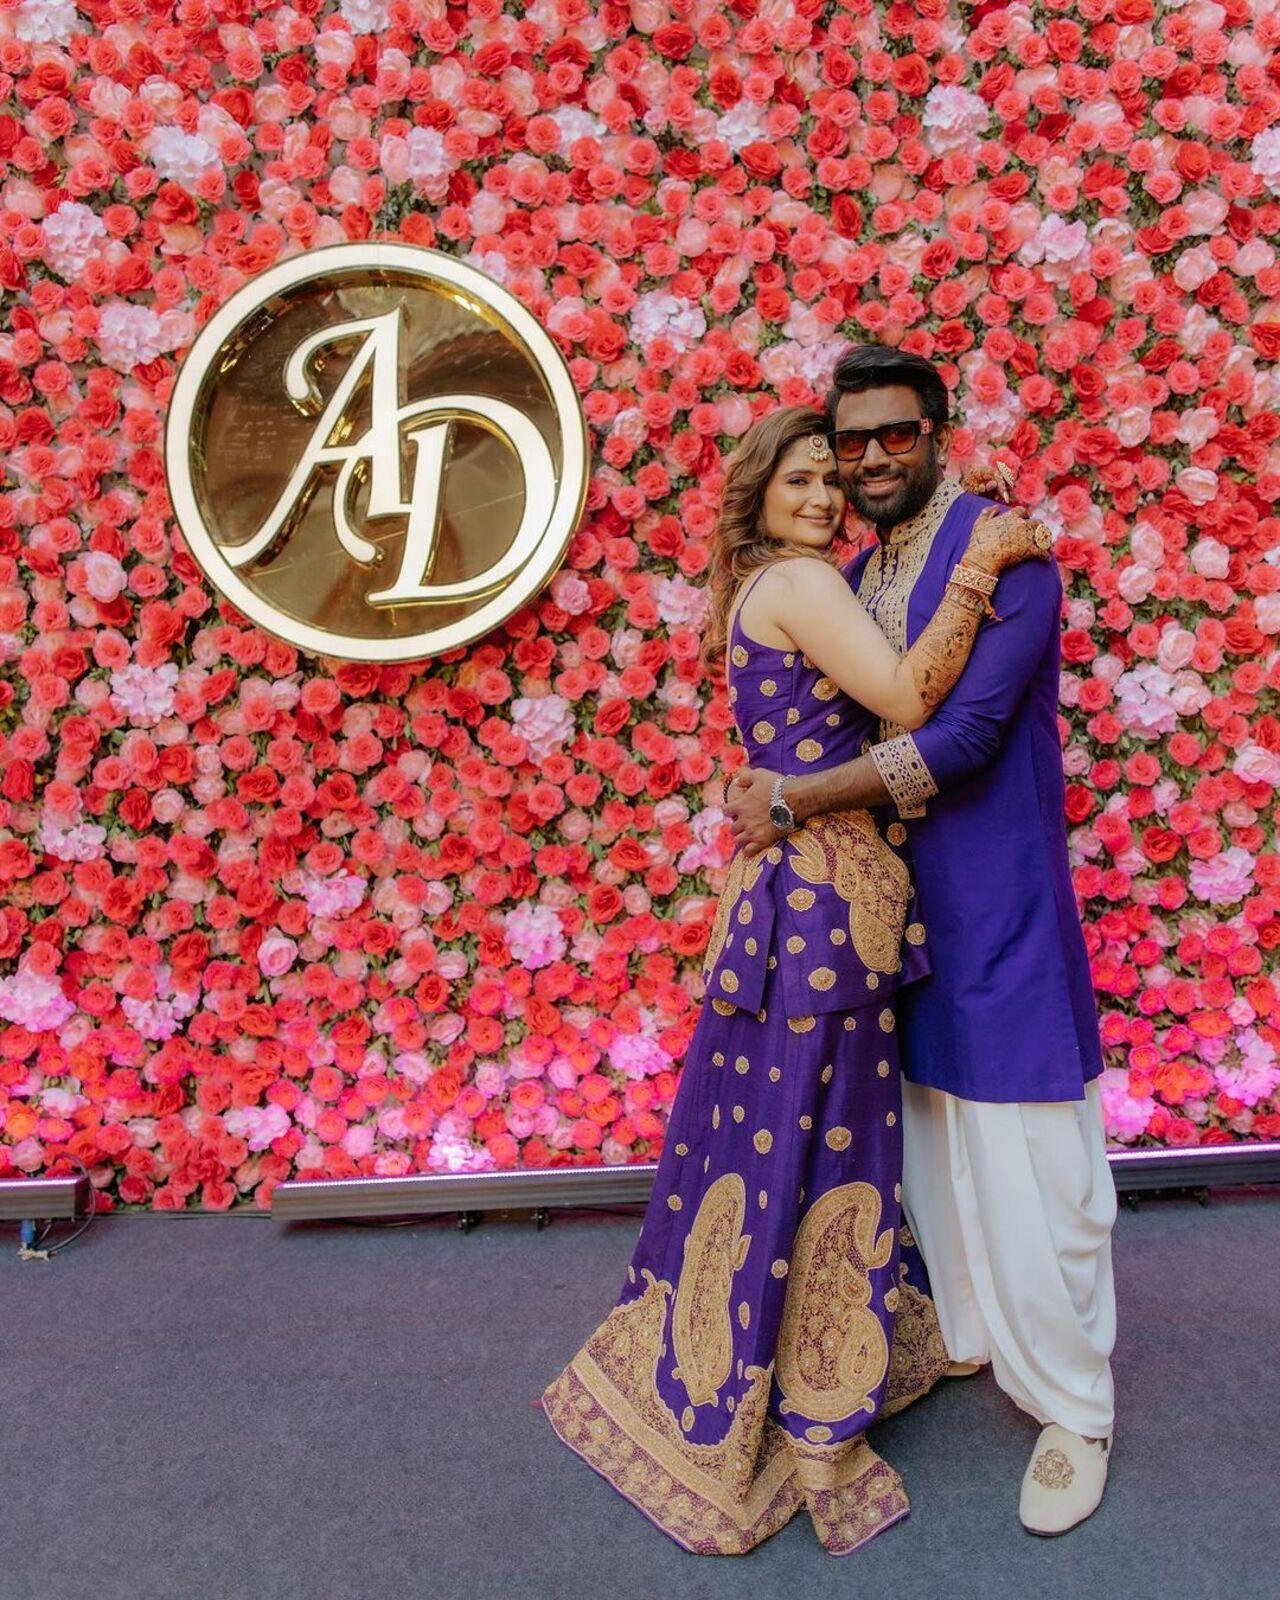 For the mehendi ceremony, she and her husband Dipak Chauhan colour co-ordinated in purple outfits